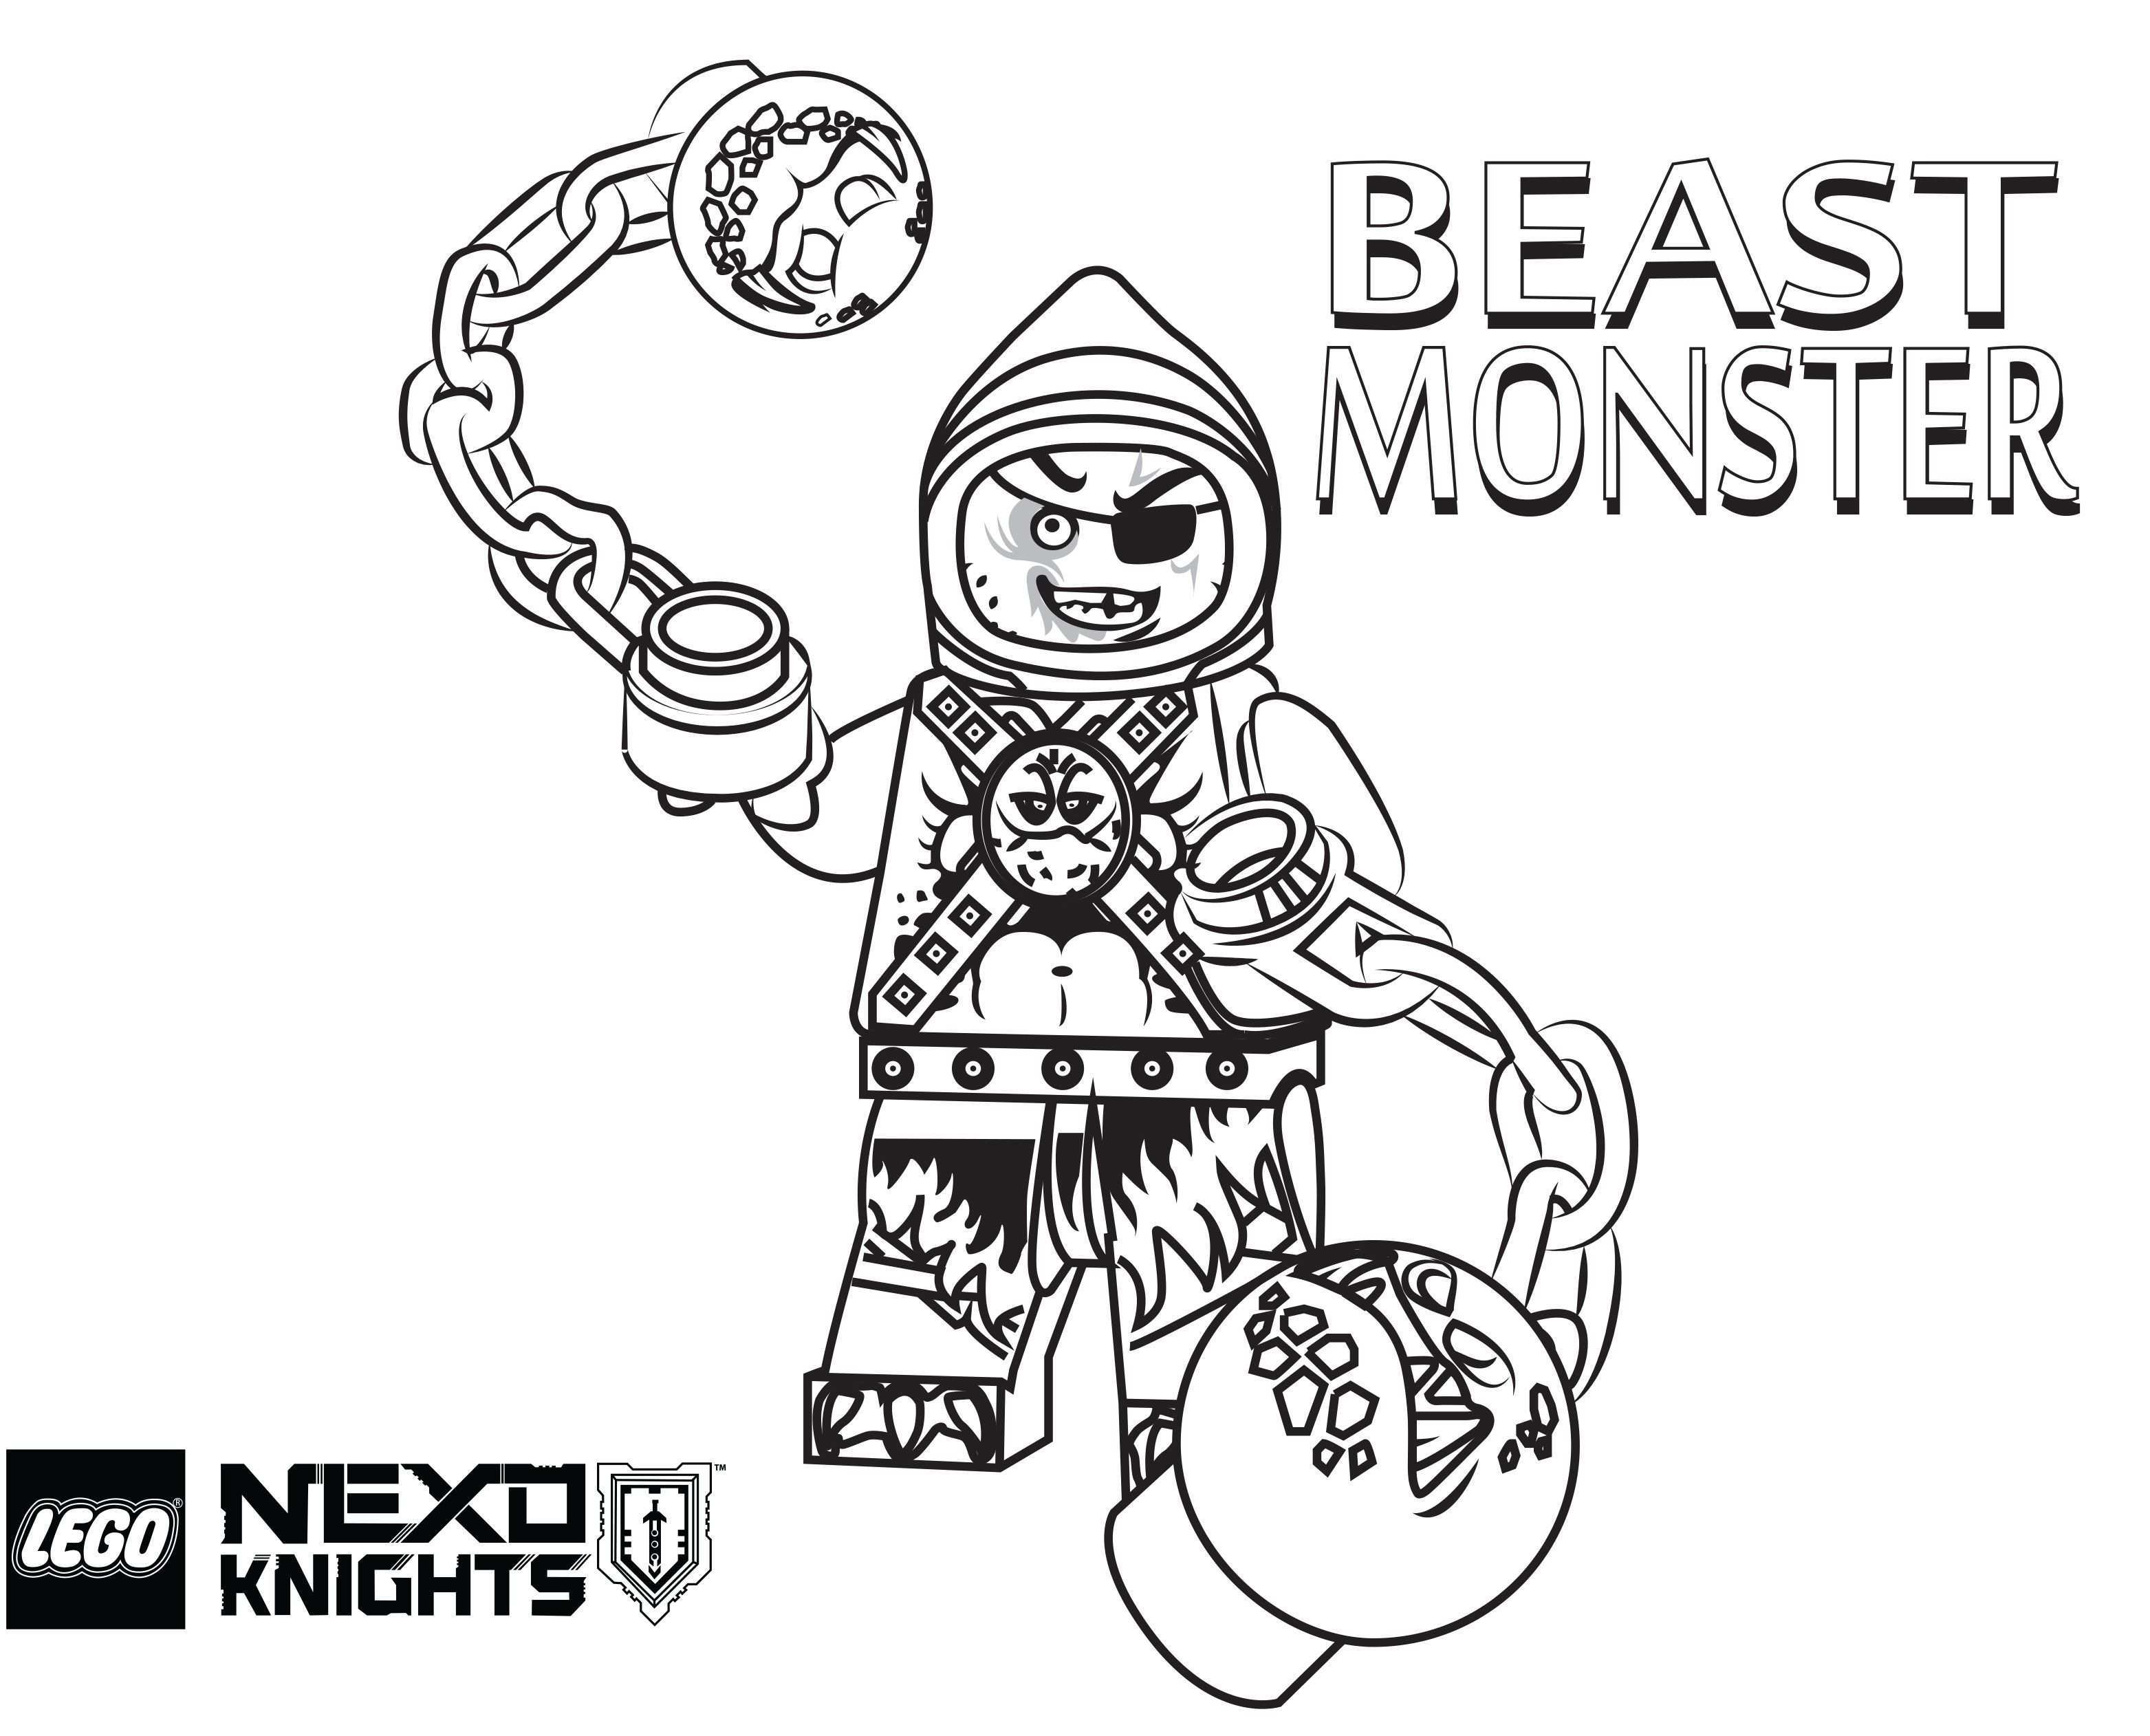 Lego Nexo Knights Coloring Pages Free Printable Lego Nexo Knights Color Sheets Monste